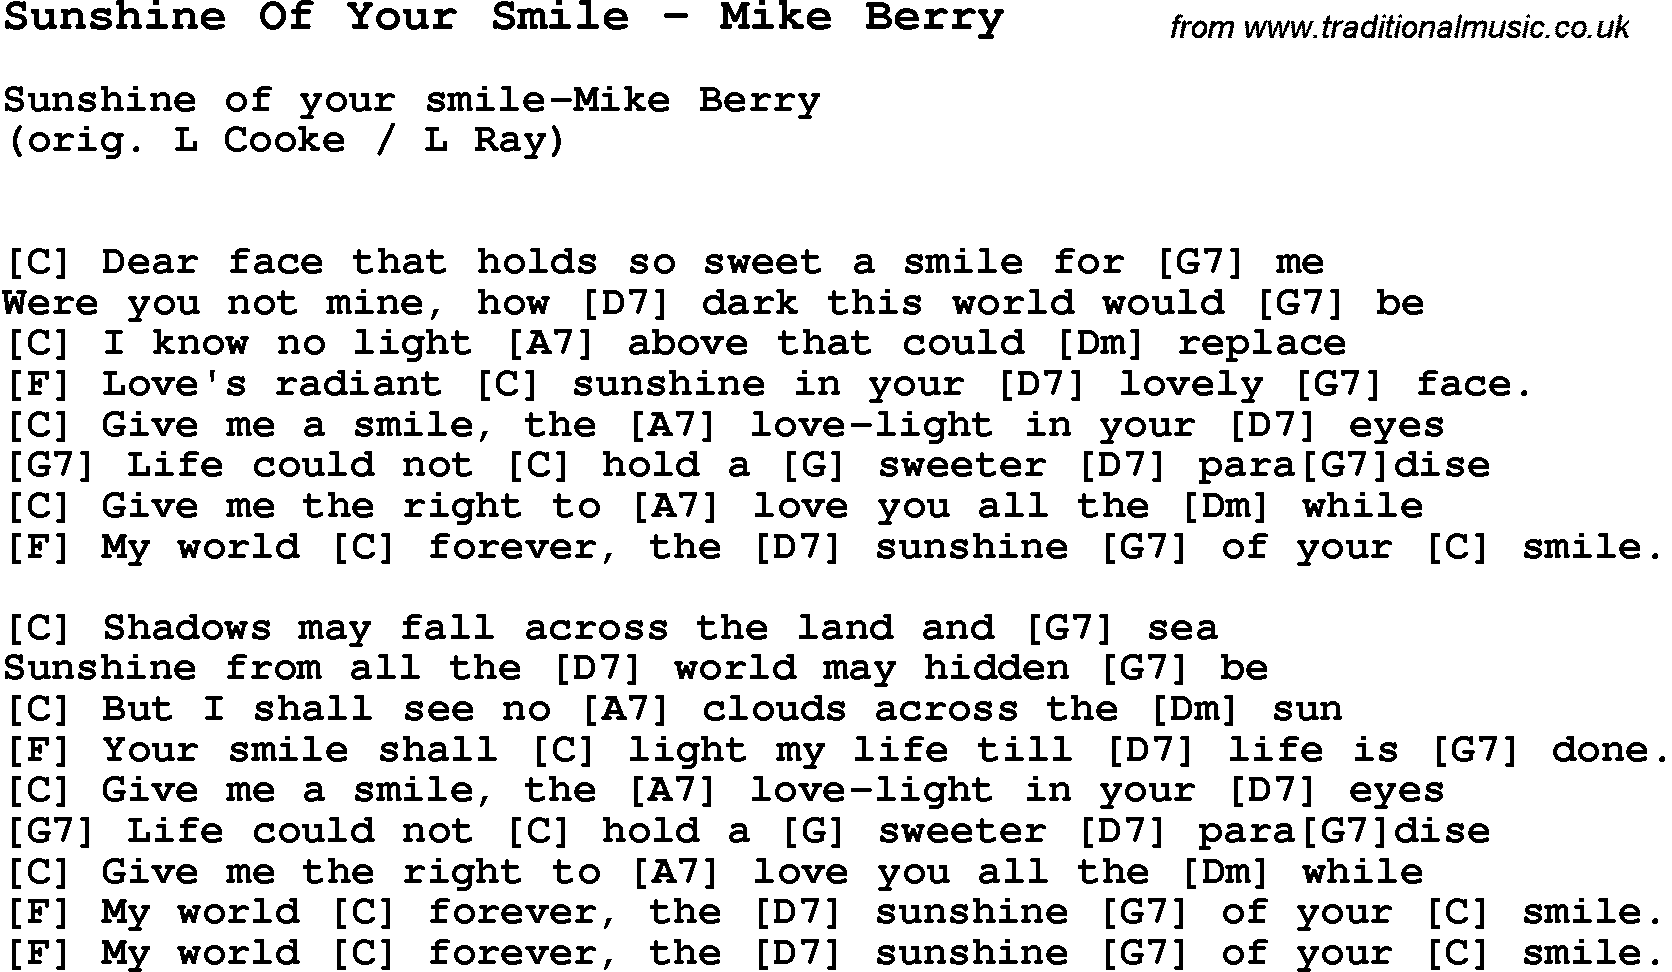 Song Sunshine Of Your Smile by Mike Berry, with lyrics for vocal performance and accompaniment chords for Ukulele, Guitar Banjo etc.